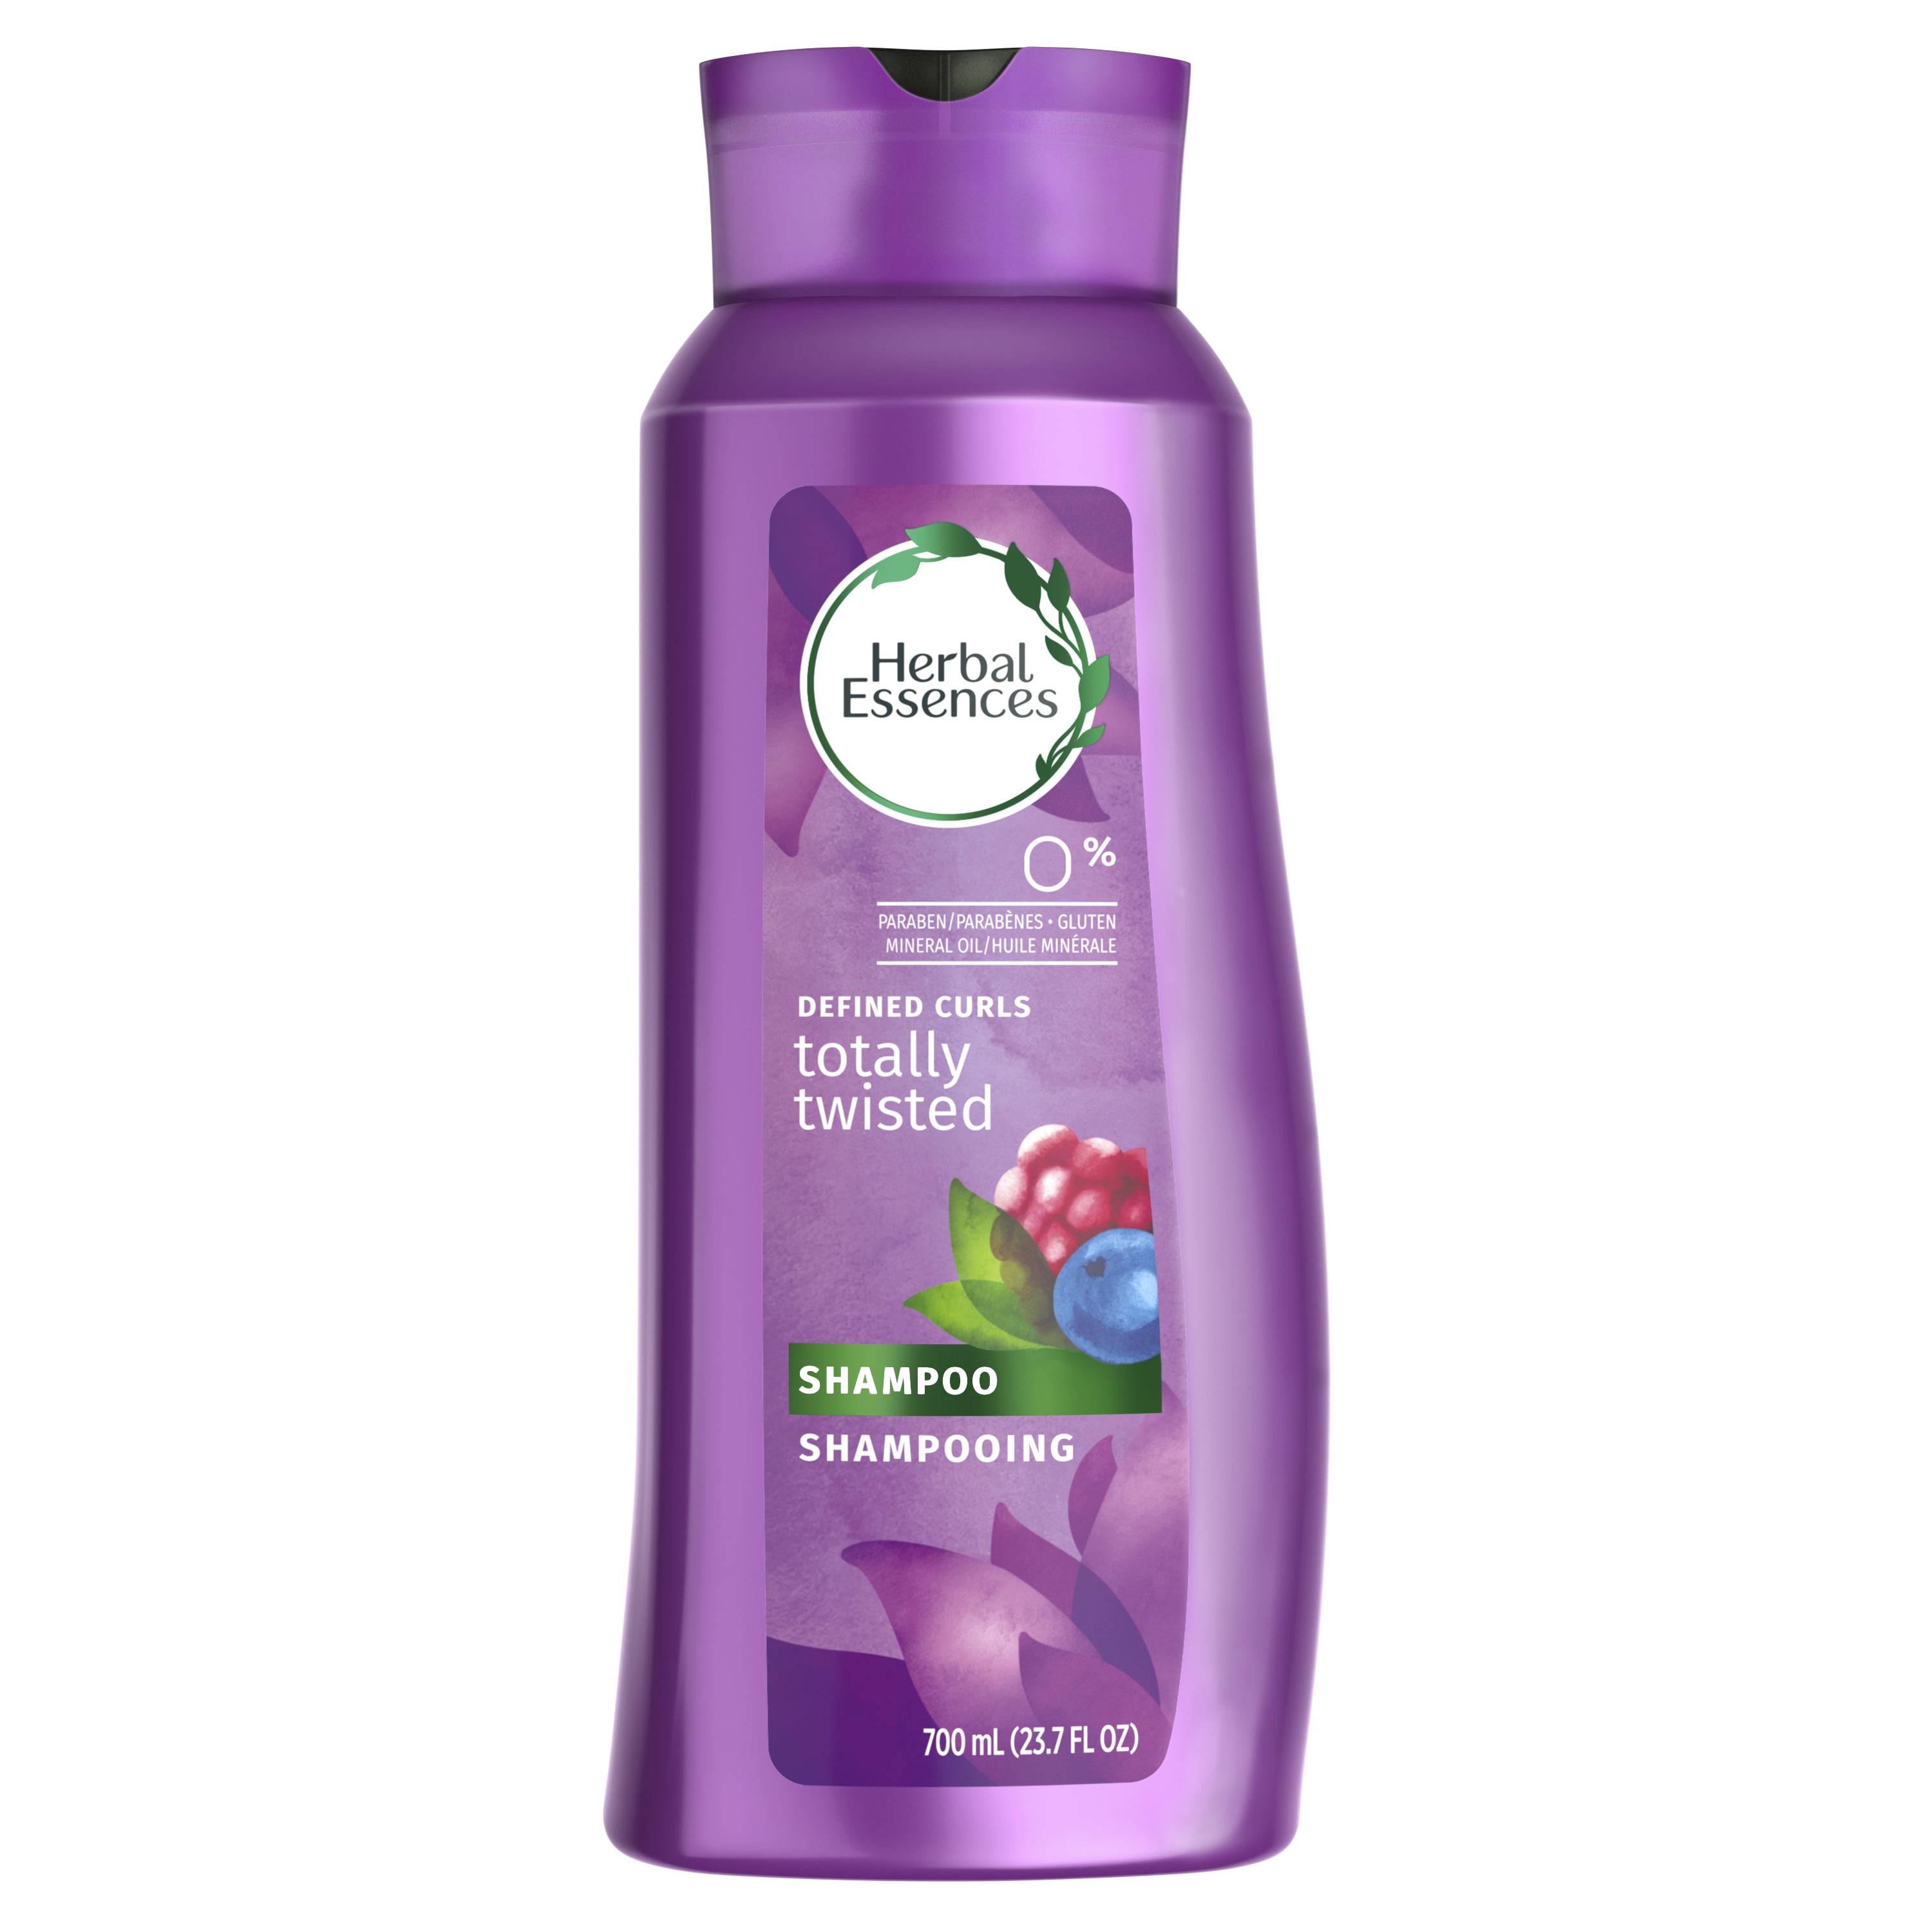 Herbal Essences Totally Twisted Curly Hair Shampoo